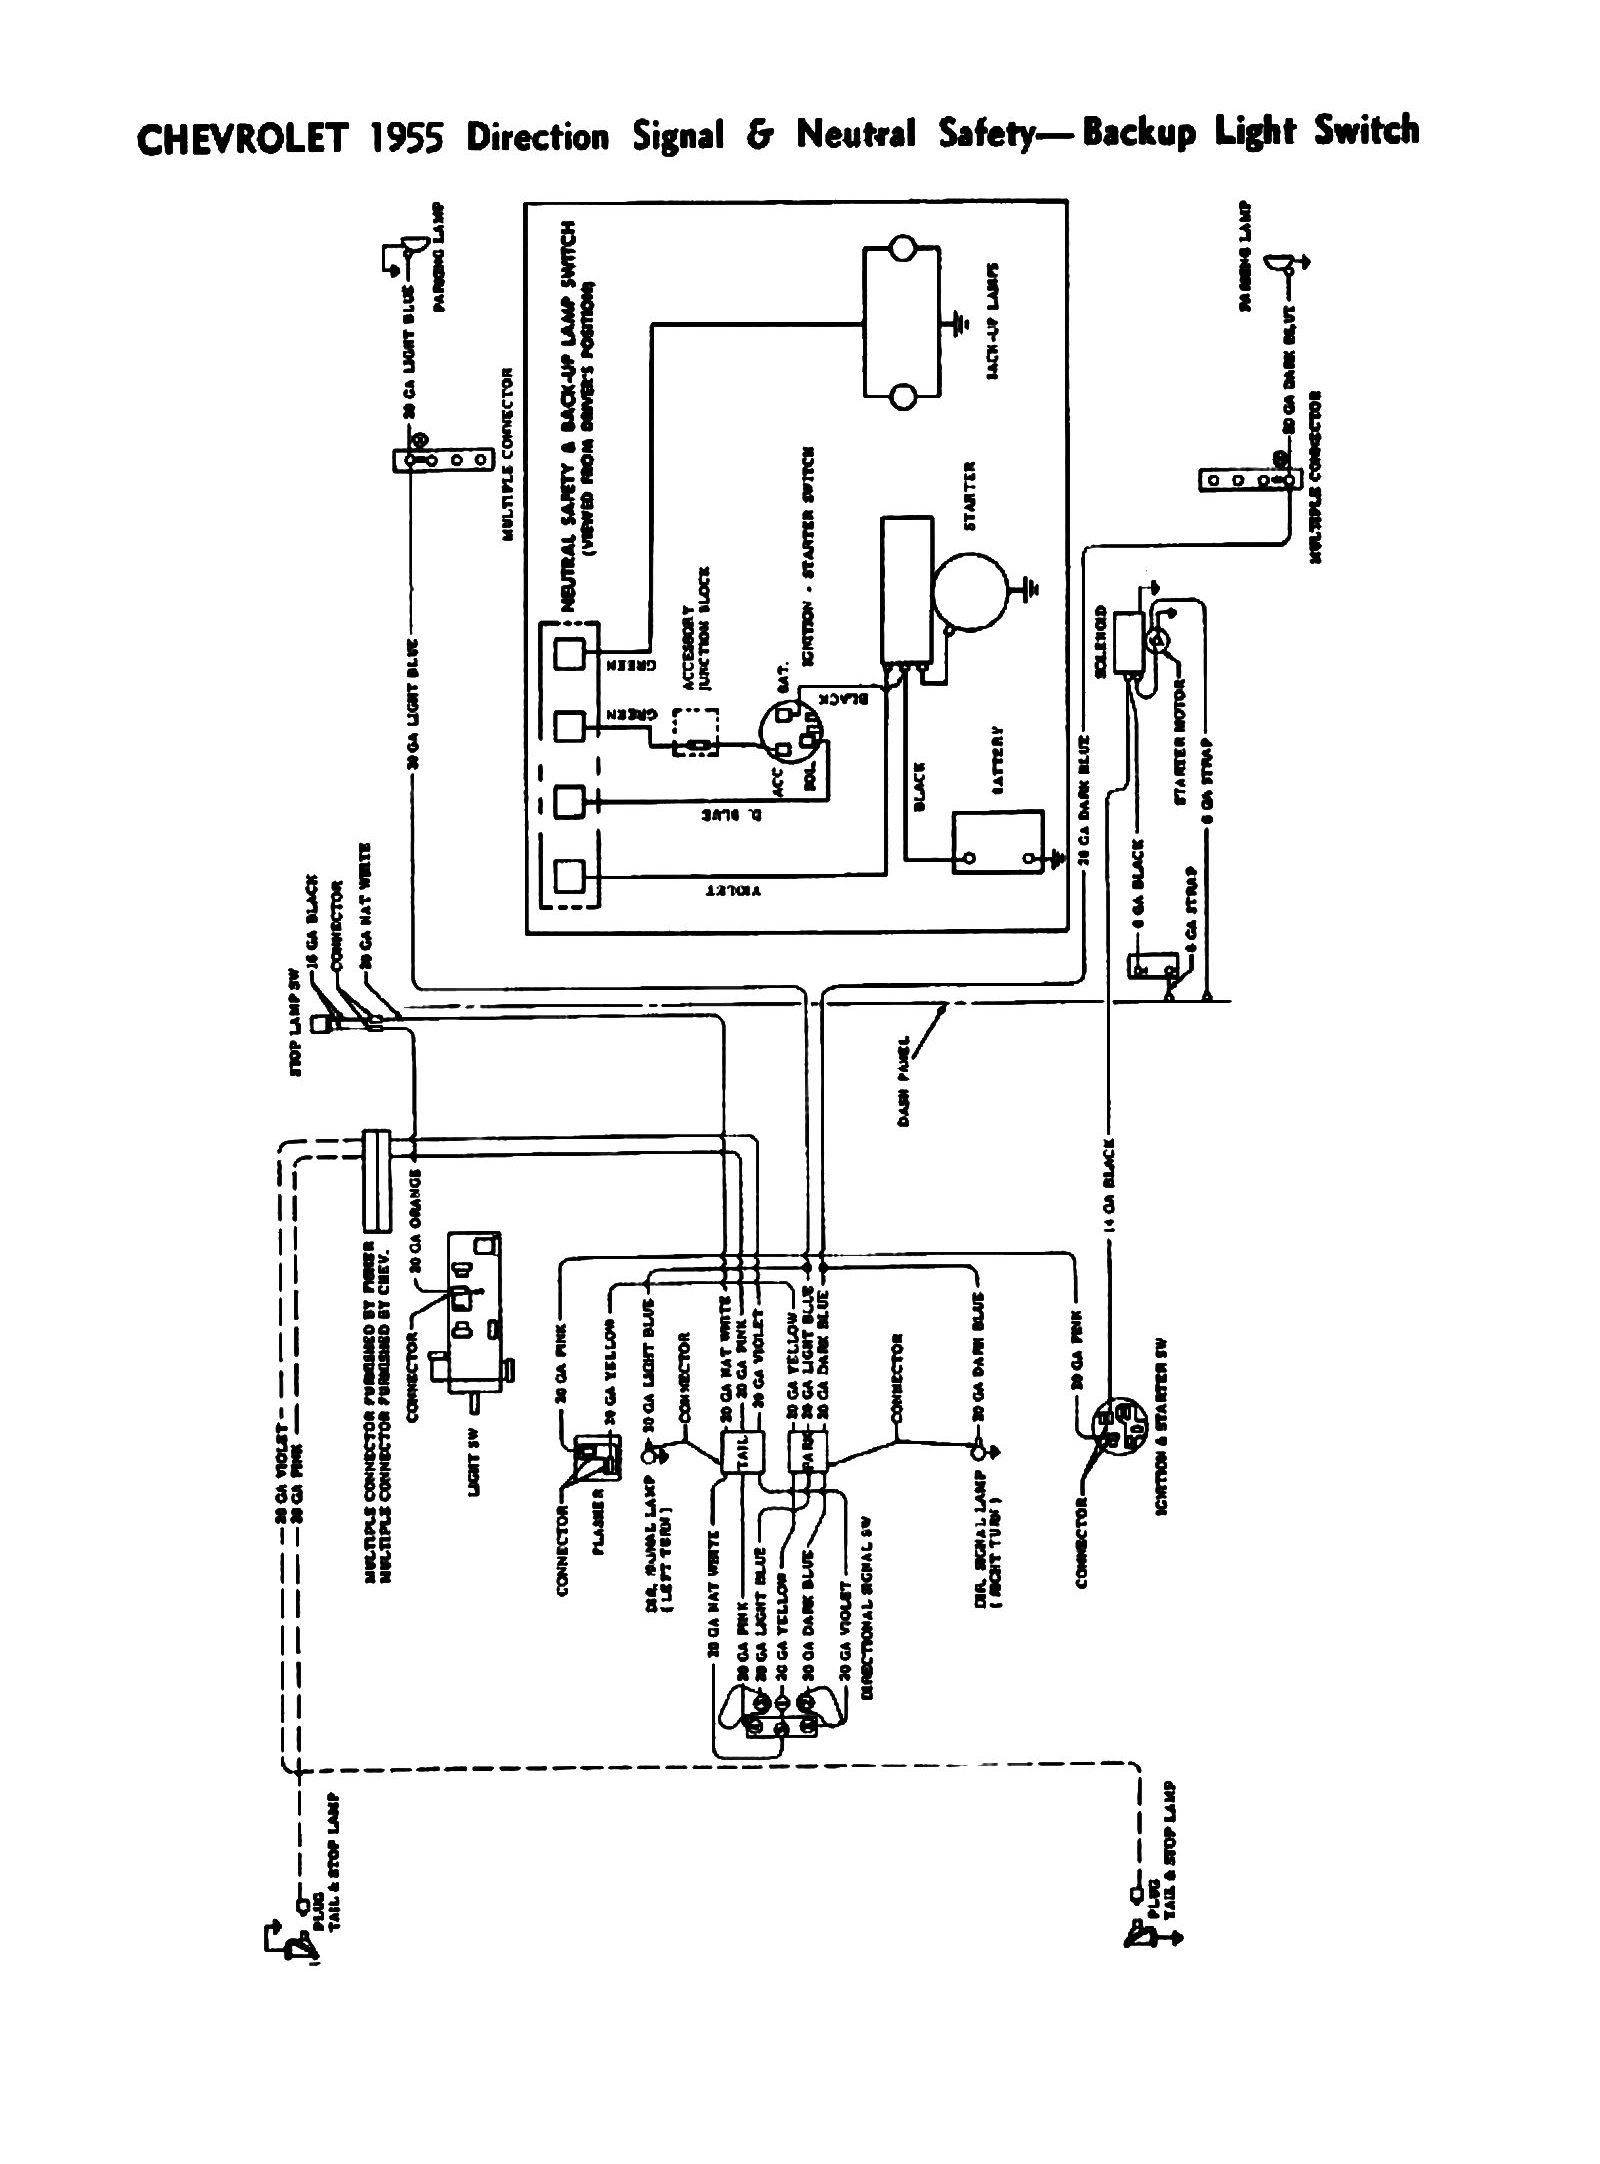 1957 chevrolet 6 cylinder wiring diagram one fifty two ten belair 684 kb. 56 Chevy Belair Wiring Diagram Wiring Diagram Die Ignition Die Ignition Networkantidiscriminazione It